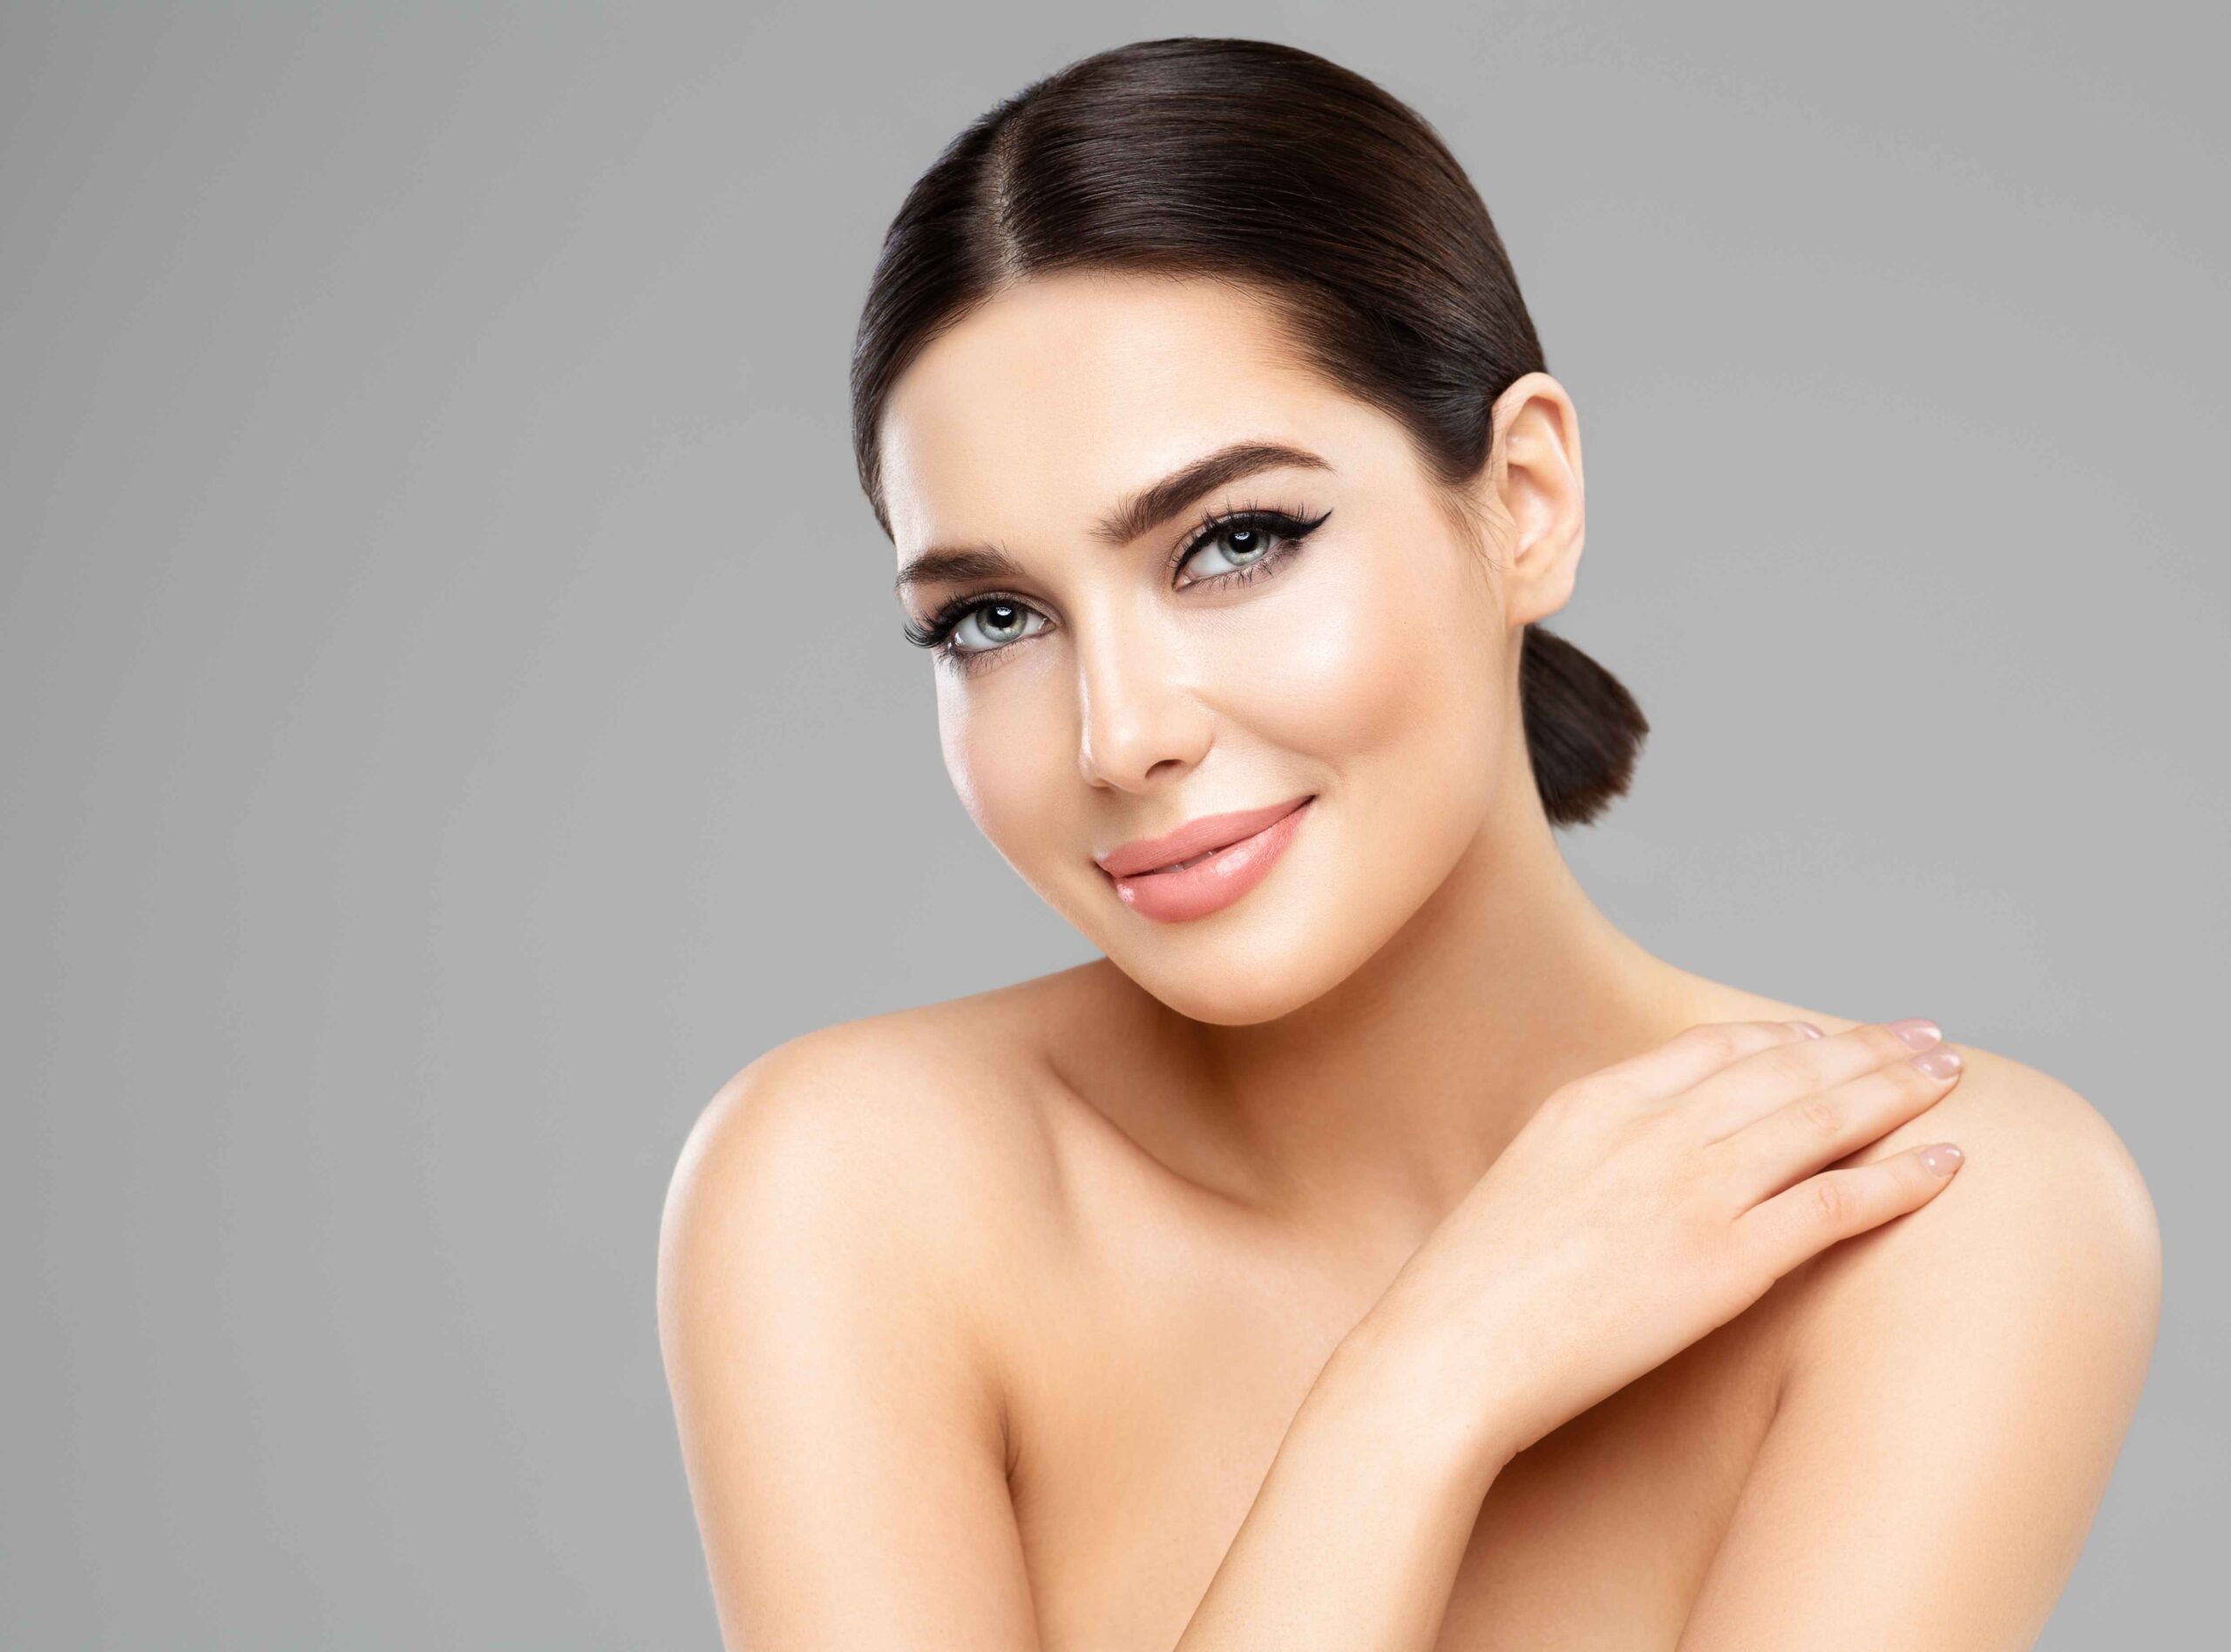 A beautiful women skincare routine | New Look Skin Center Medical Spa in Glendale, Encino and Irvine, CA